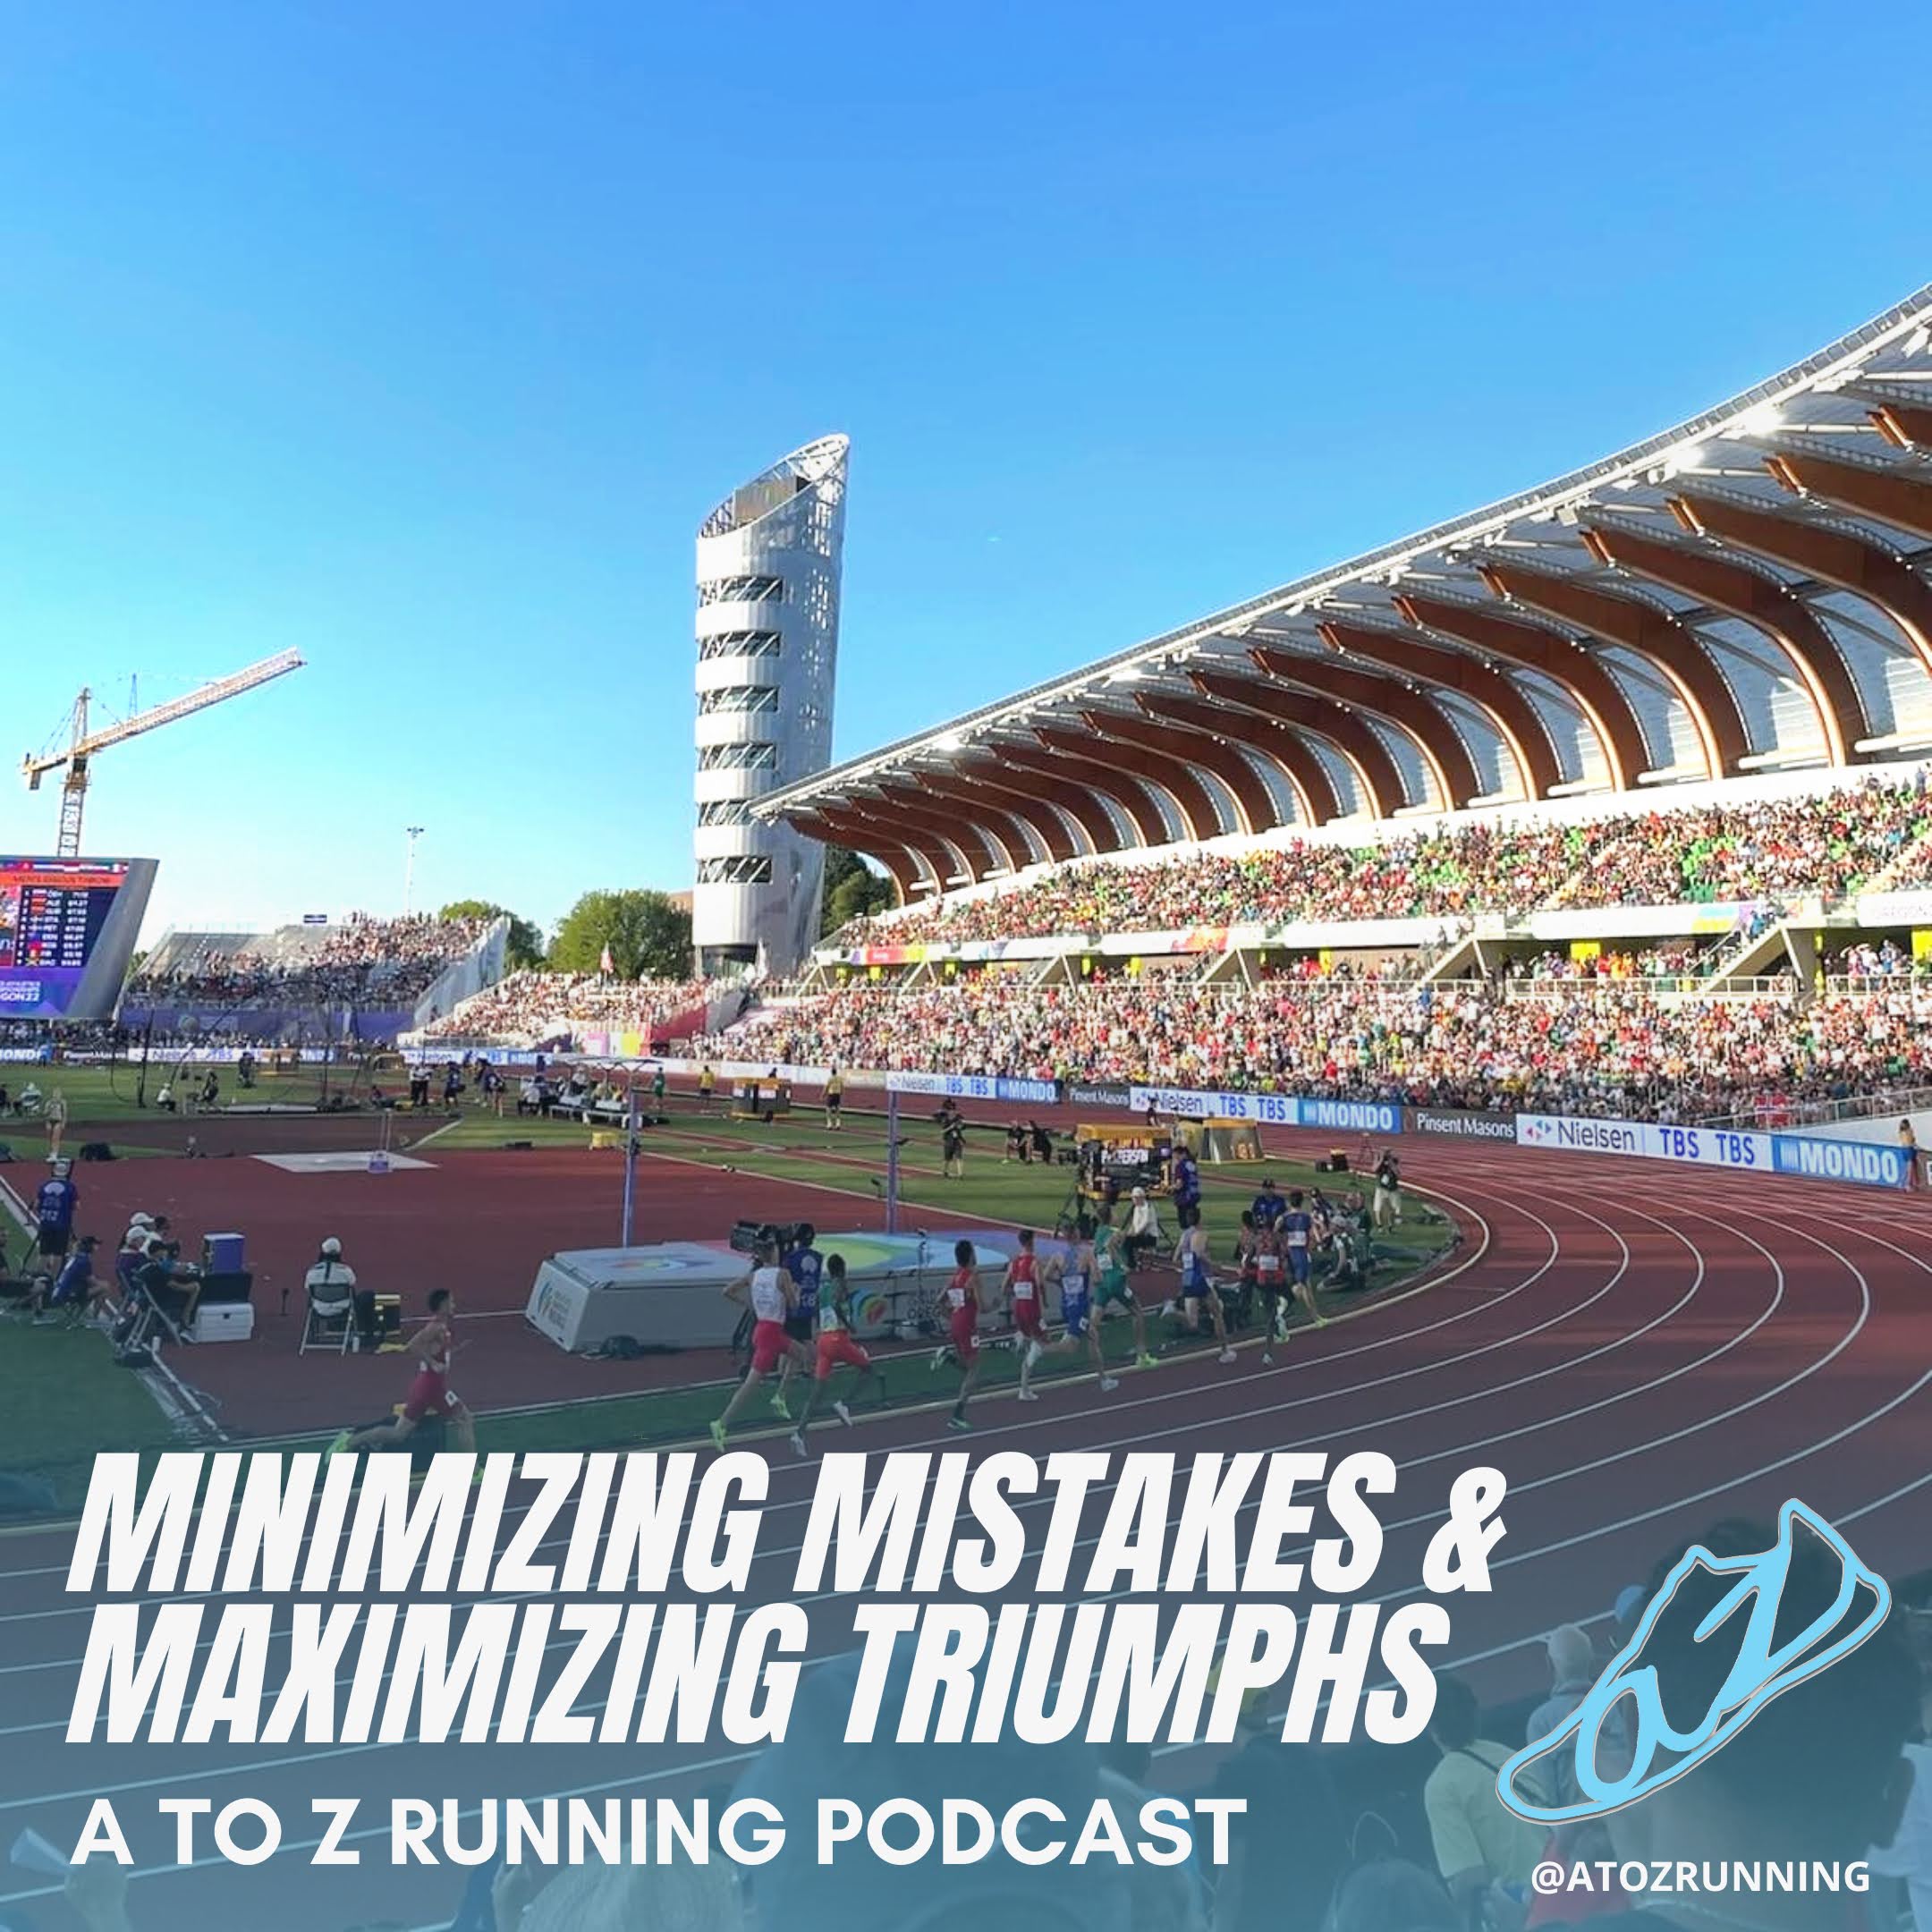 Minimizing mistakes and maximizing triumphs words over a background of a track and field photo from the World Athletics Championships 2022. There is also a headshot photo of the podcast hosts Zach and Andi Ripley smiling.